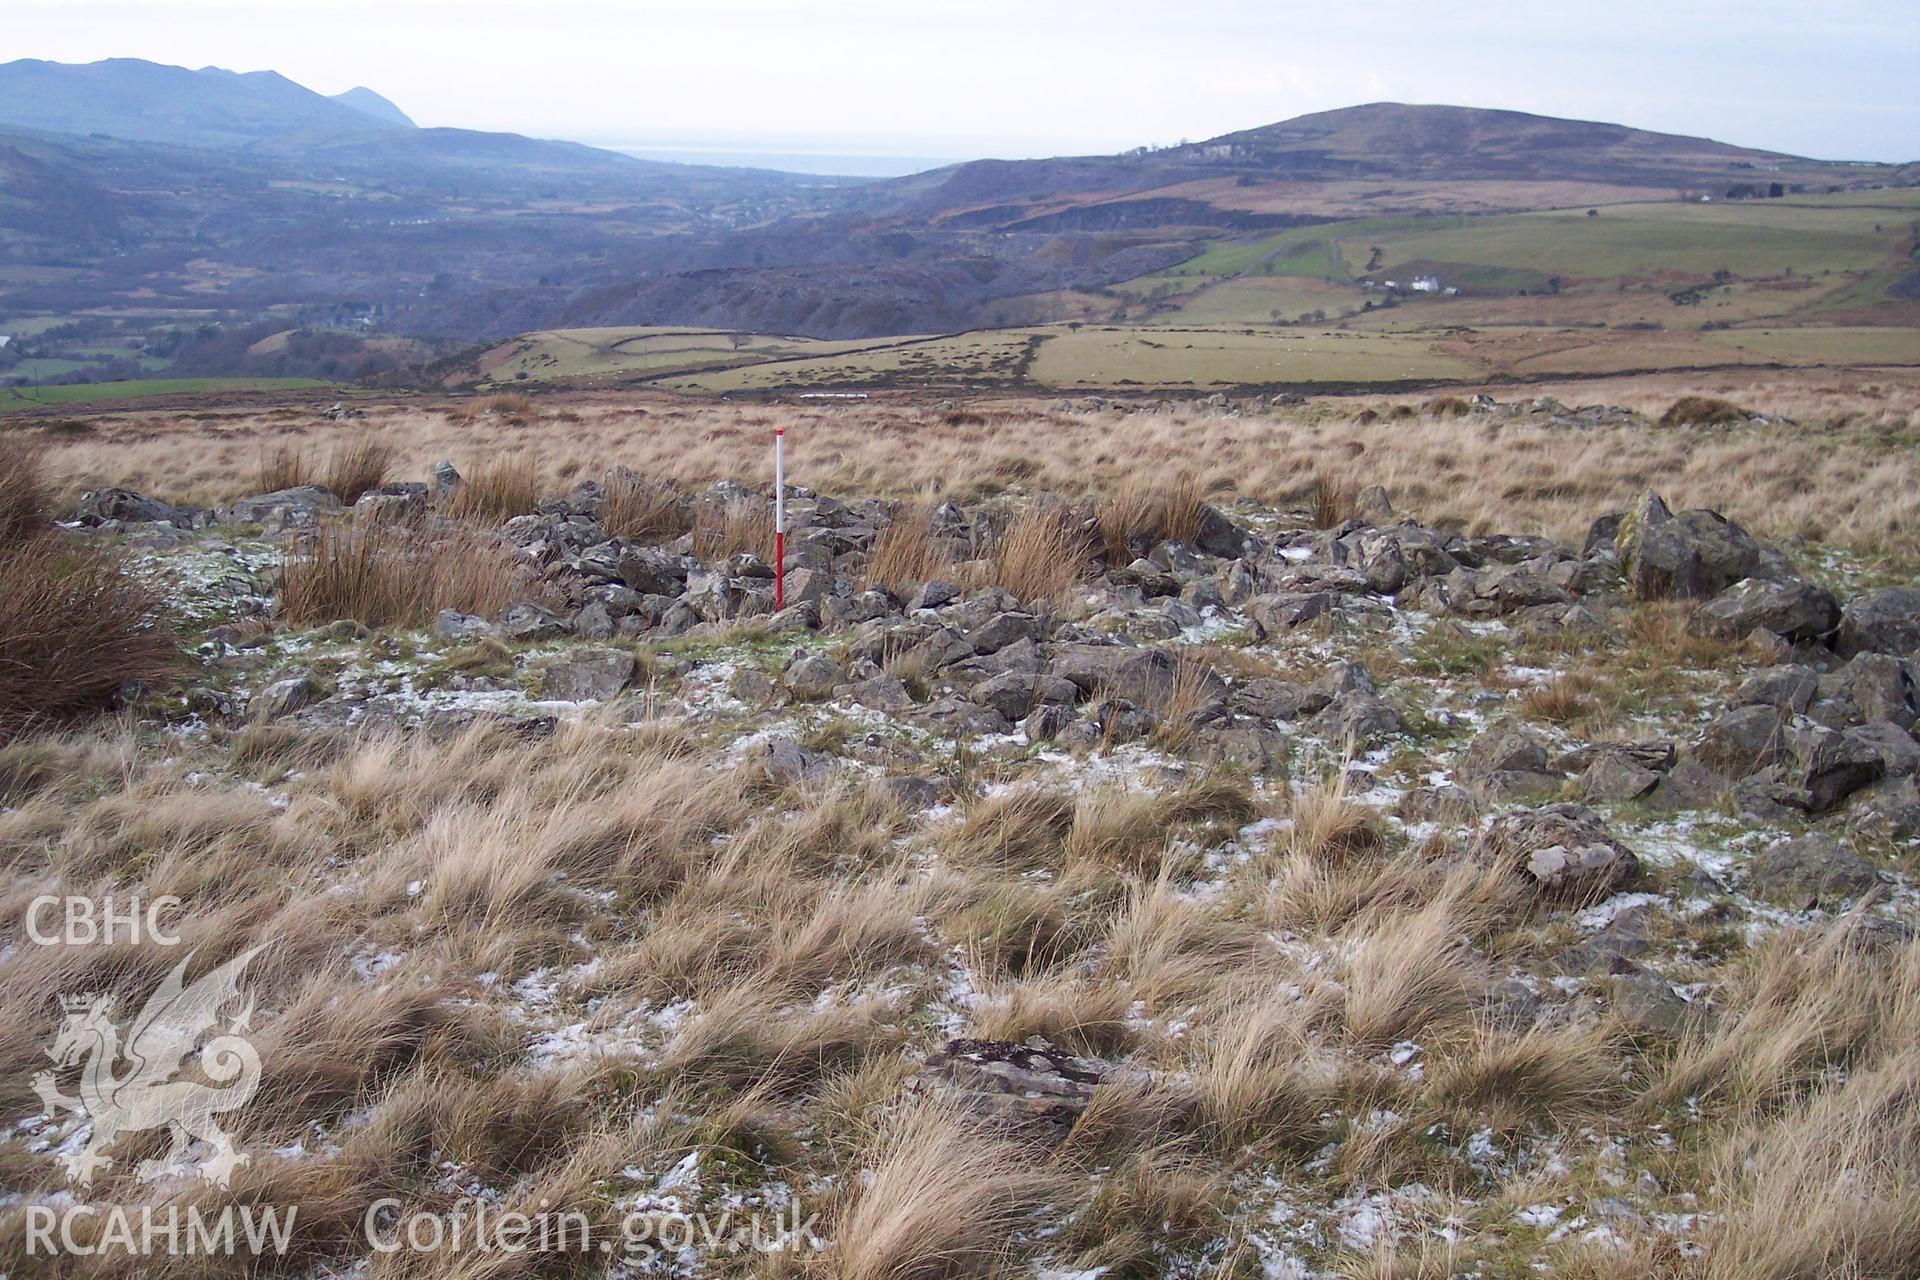 Photograph of Gelliffrydiau Hut Circle taken on 06/01/2006 by P.J. Schofield during an Upland Survey undertaken by Oxford Archaeology North.